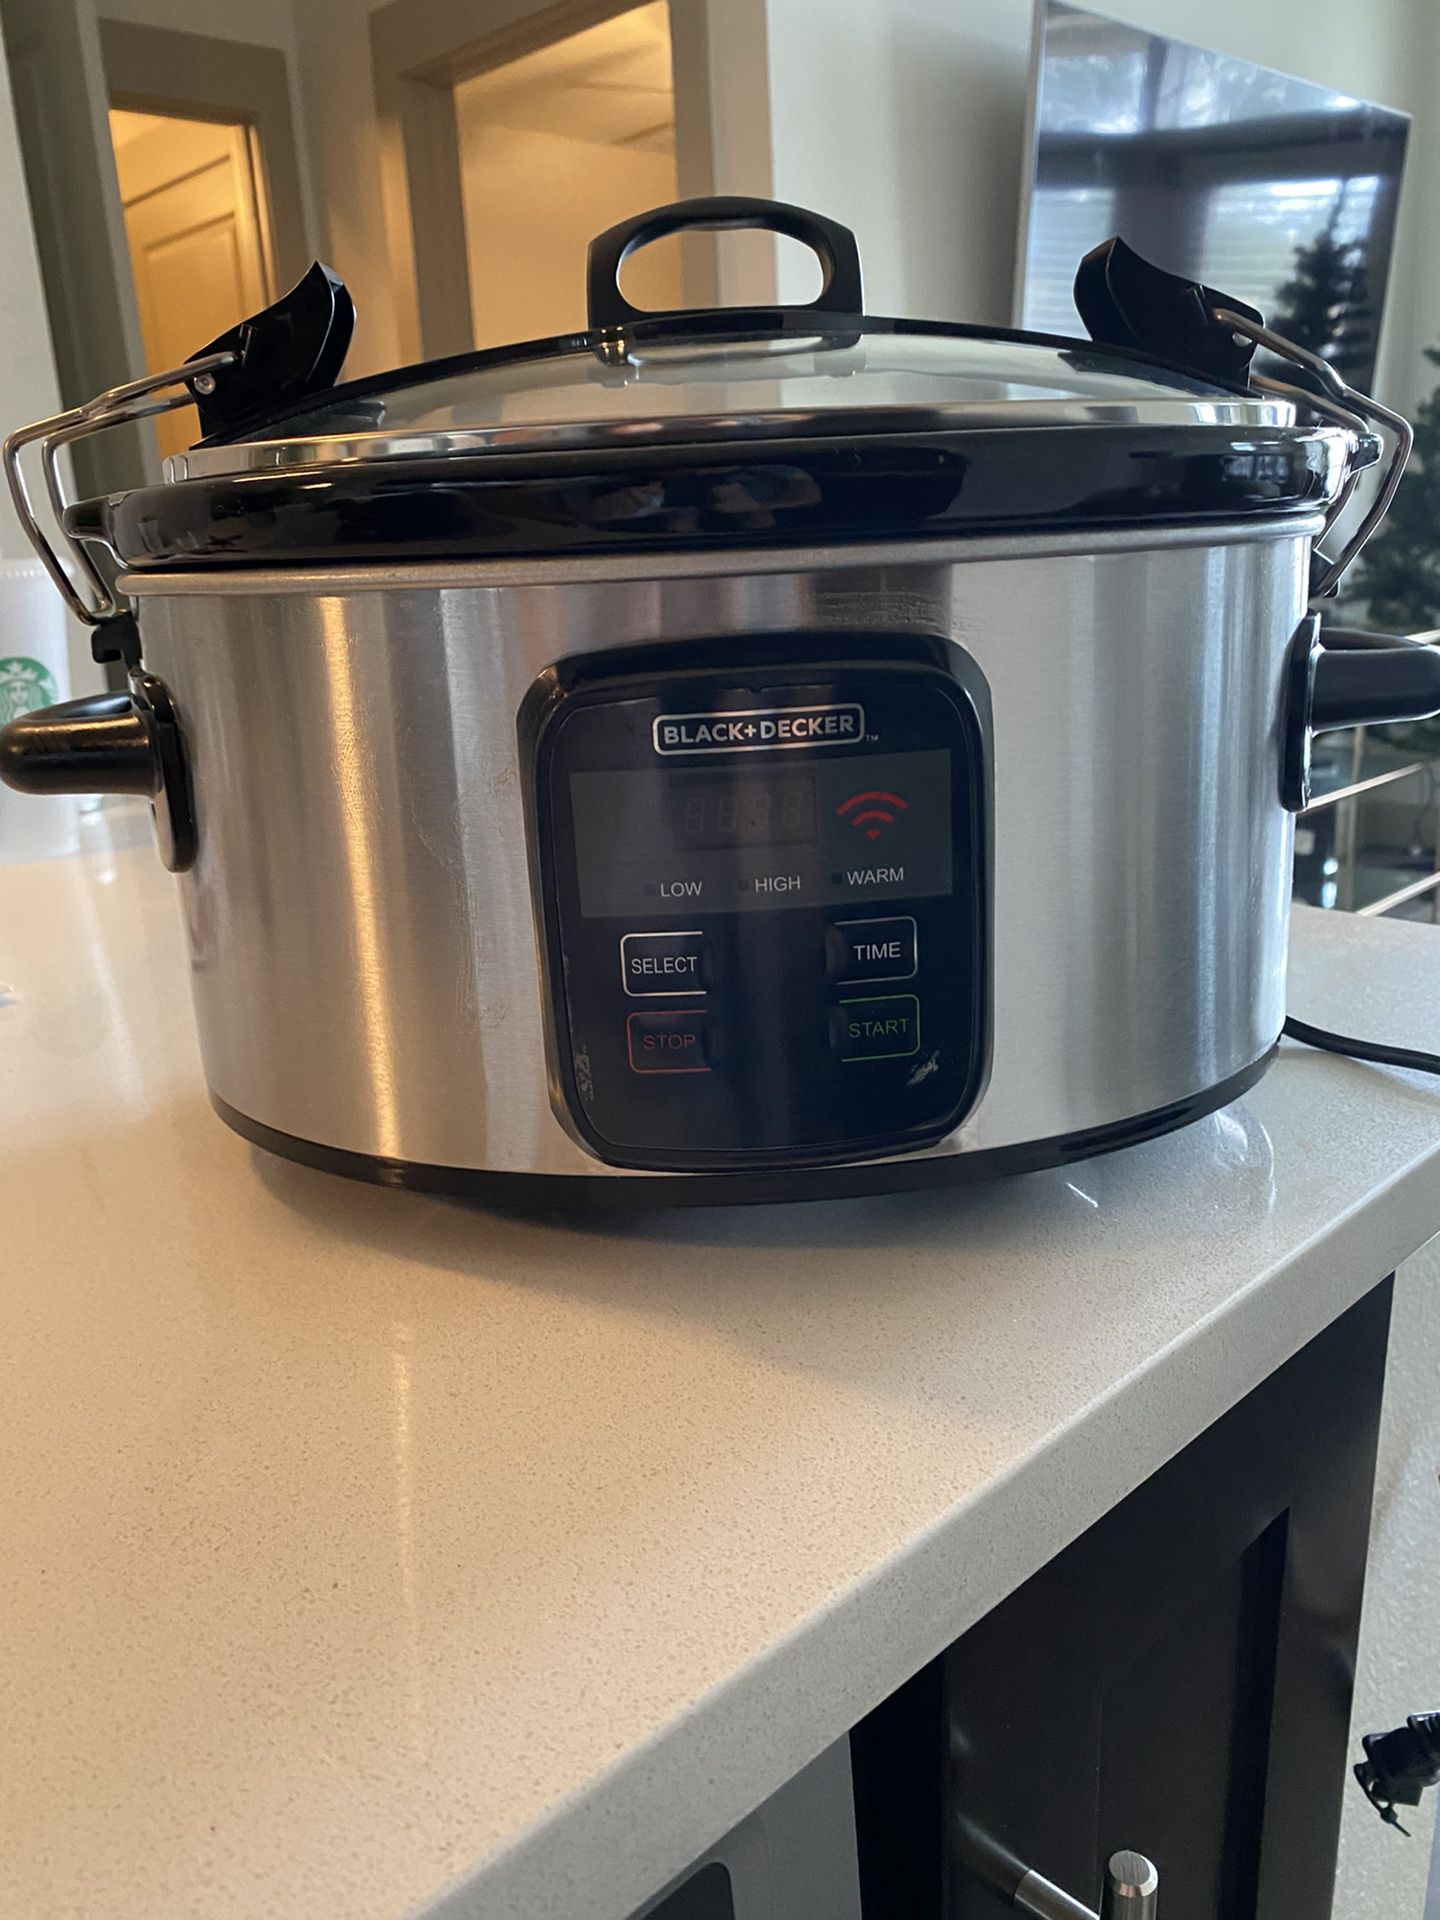 Black and decker 6 quart slow cooker wifi enabled